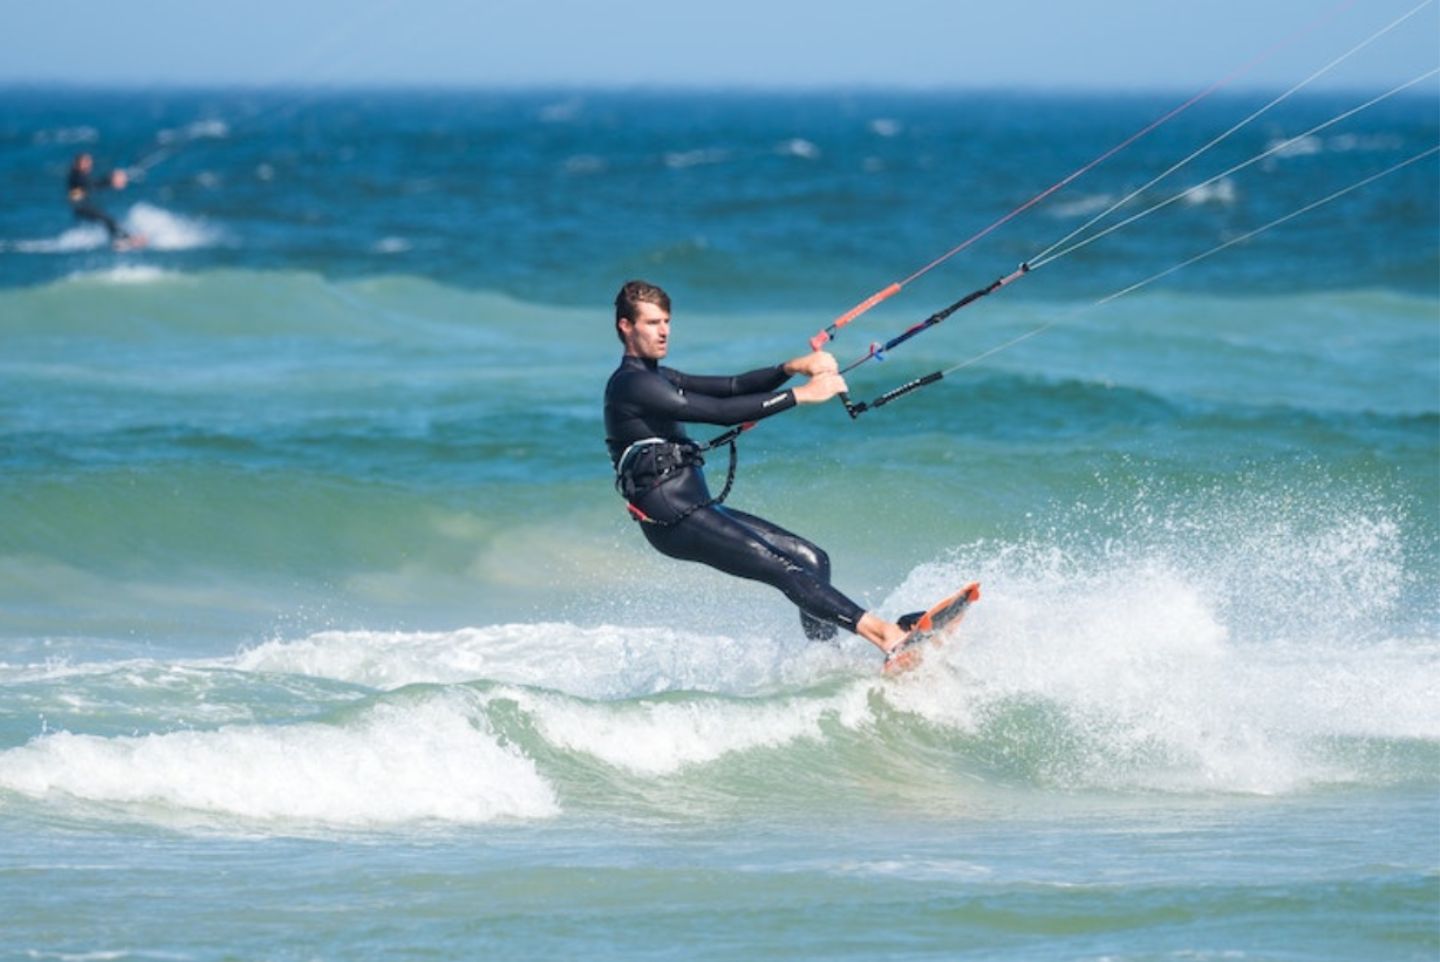 Man in a full wetsuit wind surfing holding onto his sail and surfing the blue water with blue skies. 